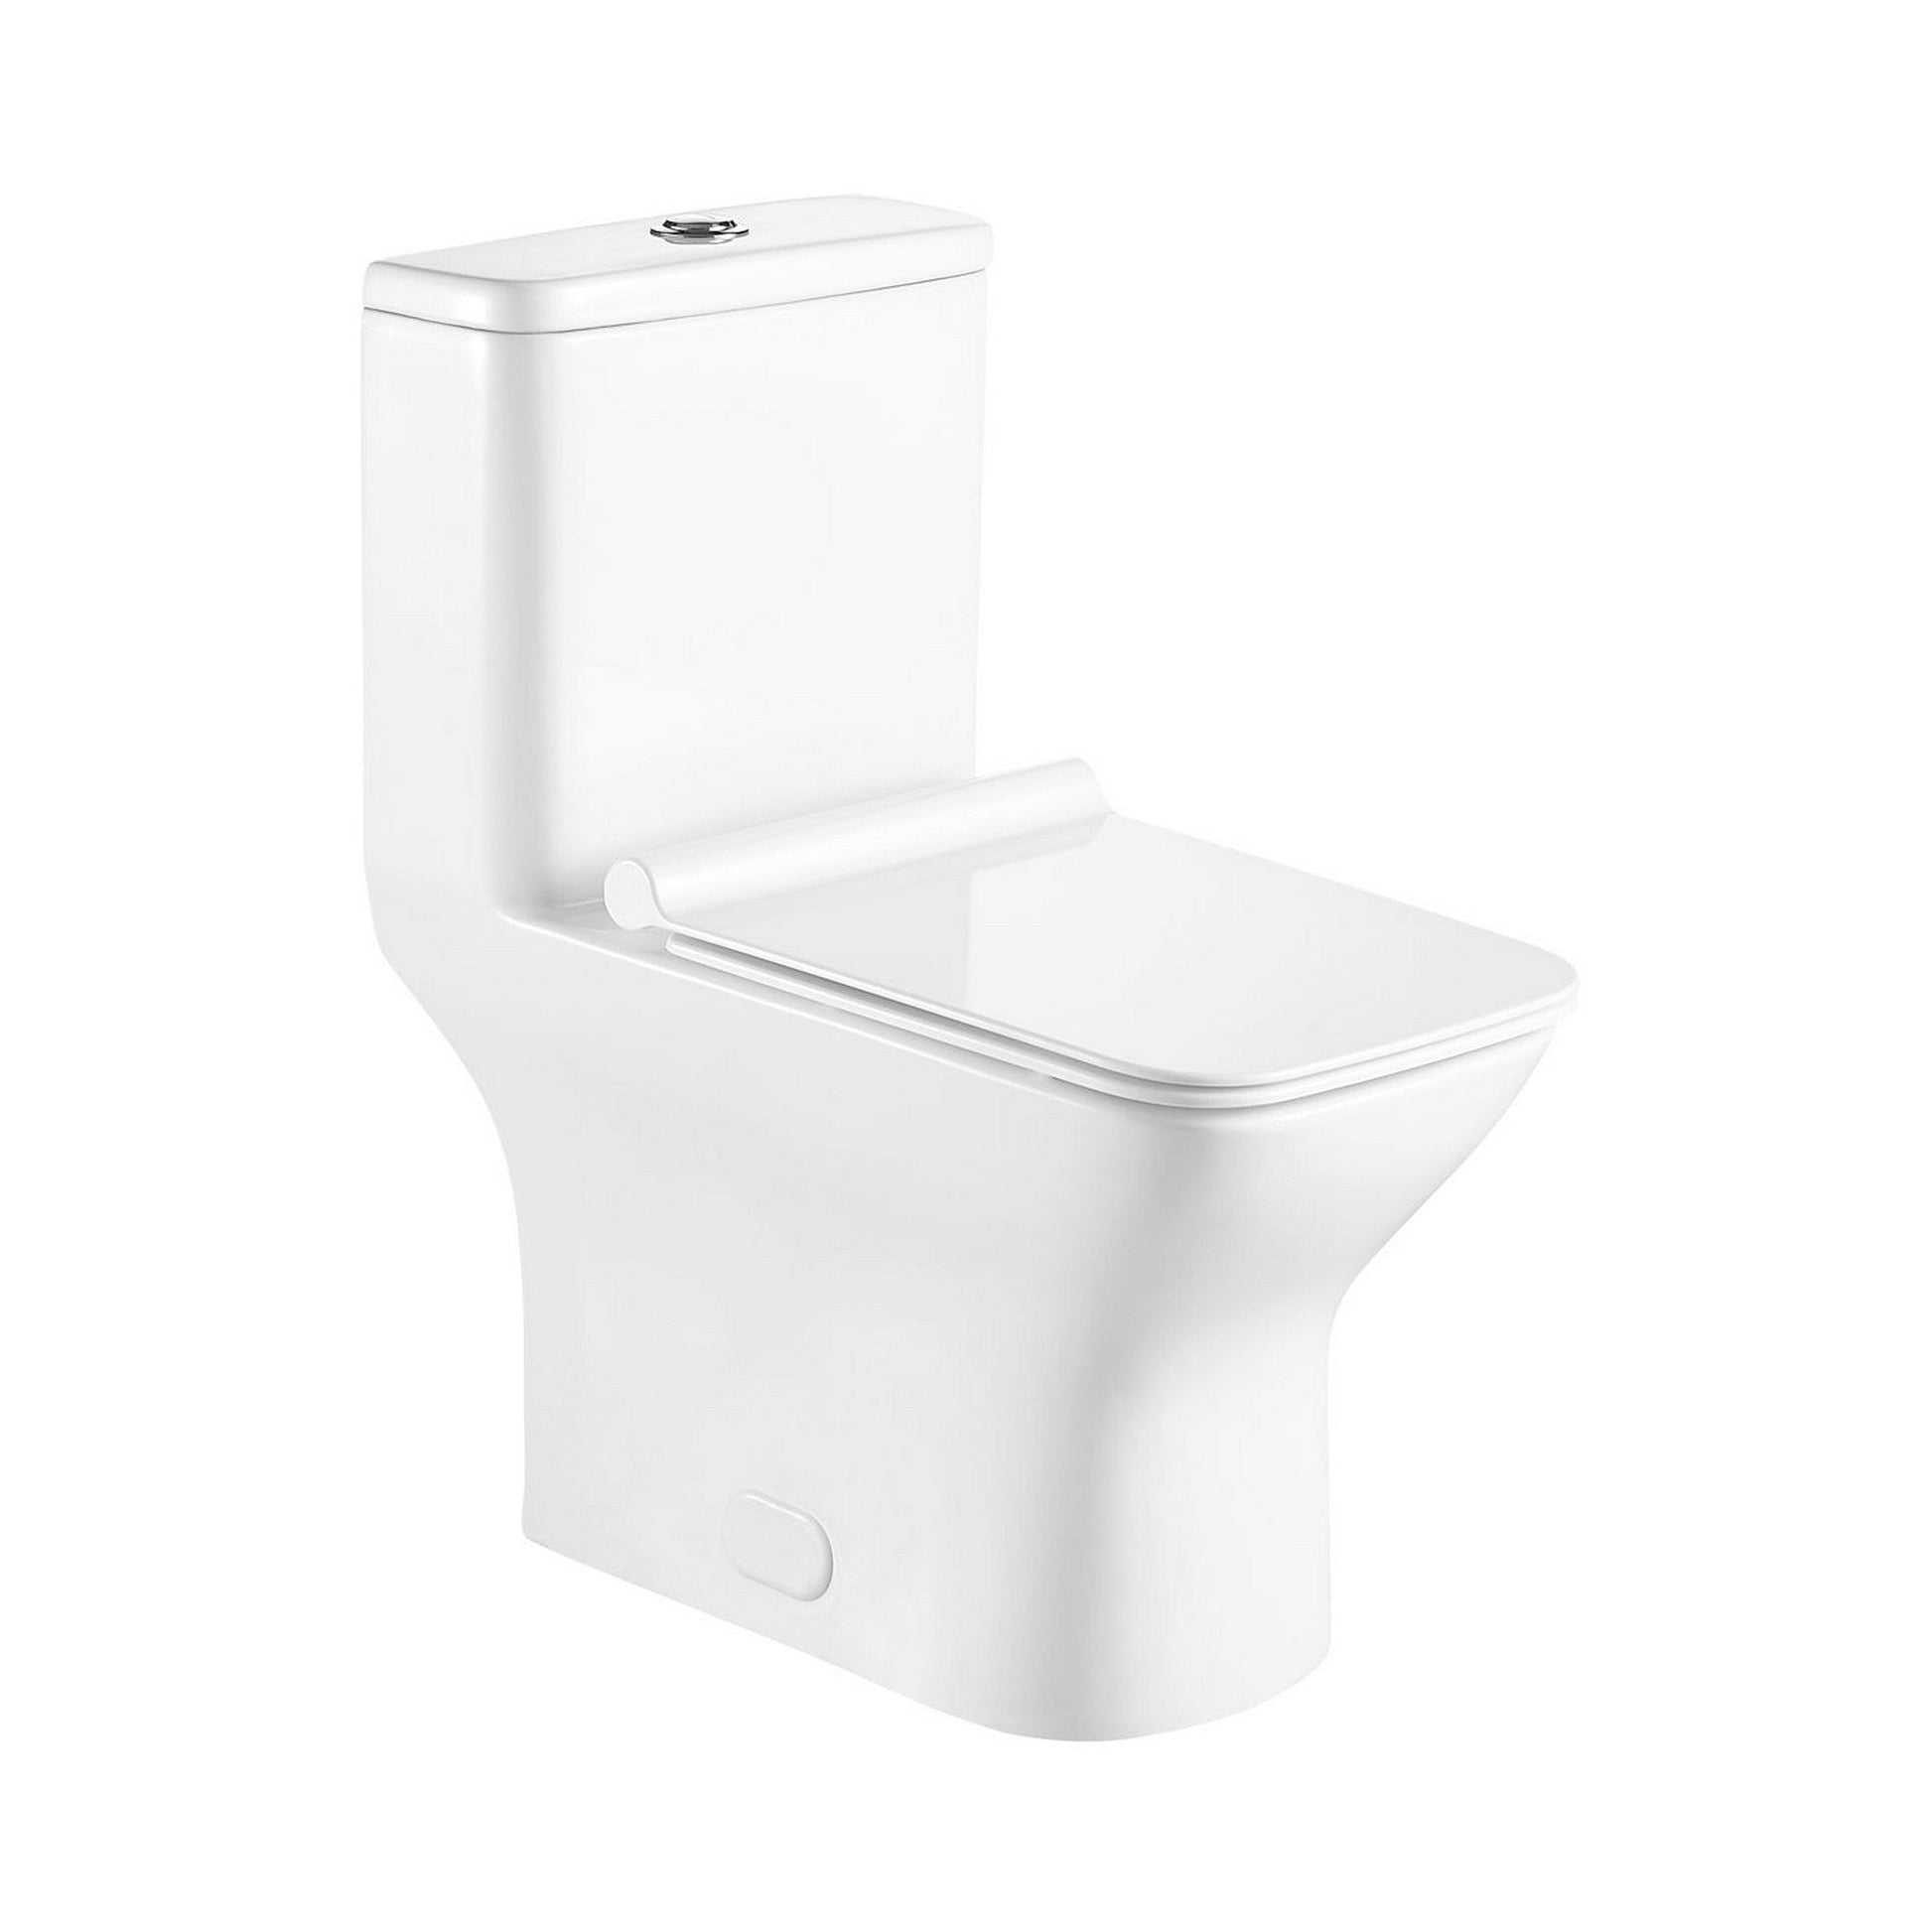 Ratel 15" x 30" Square White Gloss One-Piece Dual-Flush Floor-Mounted Toilet With Soft-Close Seat